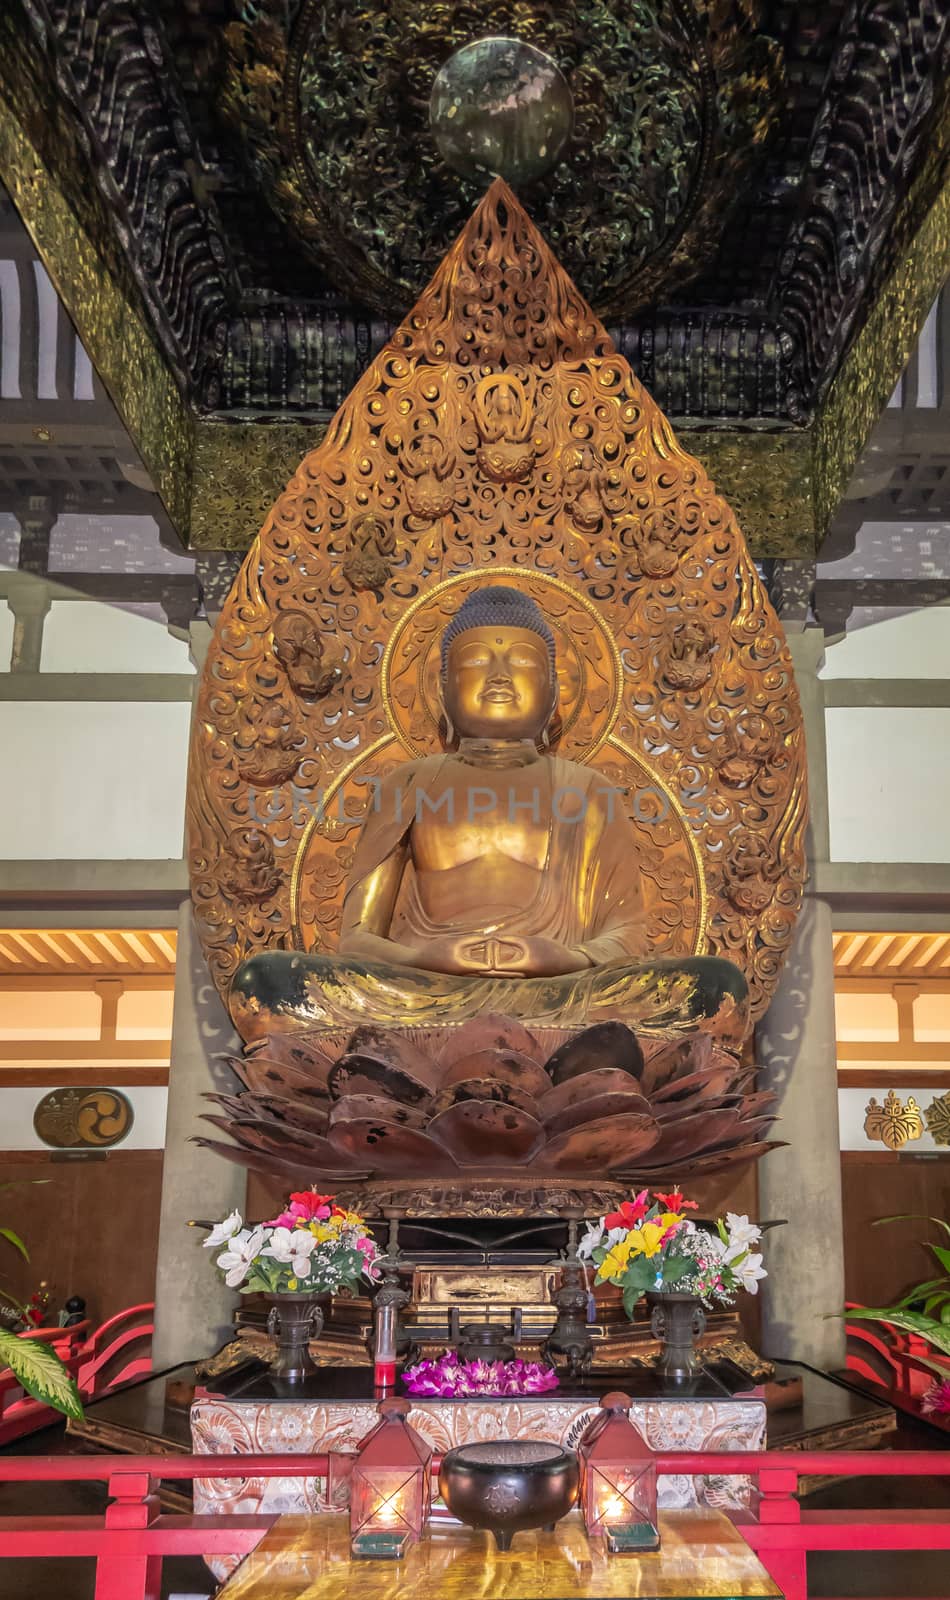 Golden Bhudda in Byodo-in Buddhist temple in Kaneohe, Oahu, Hawa by Claudine